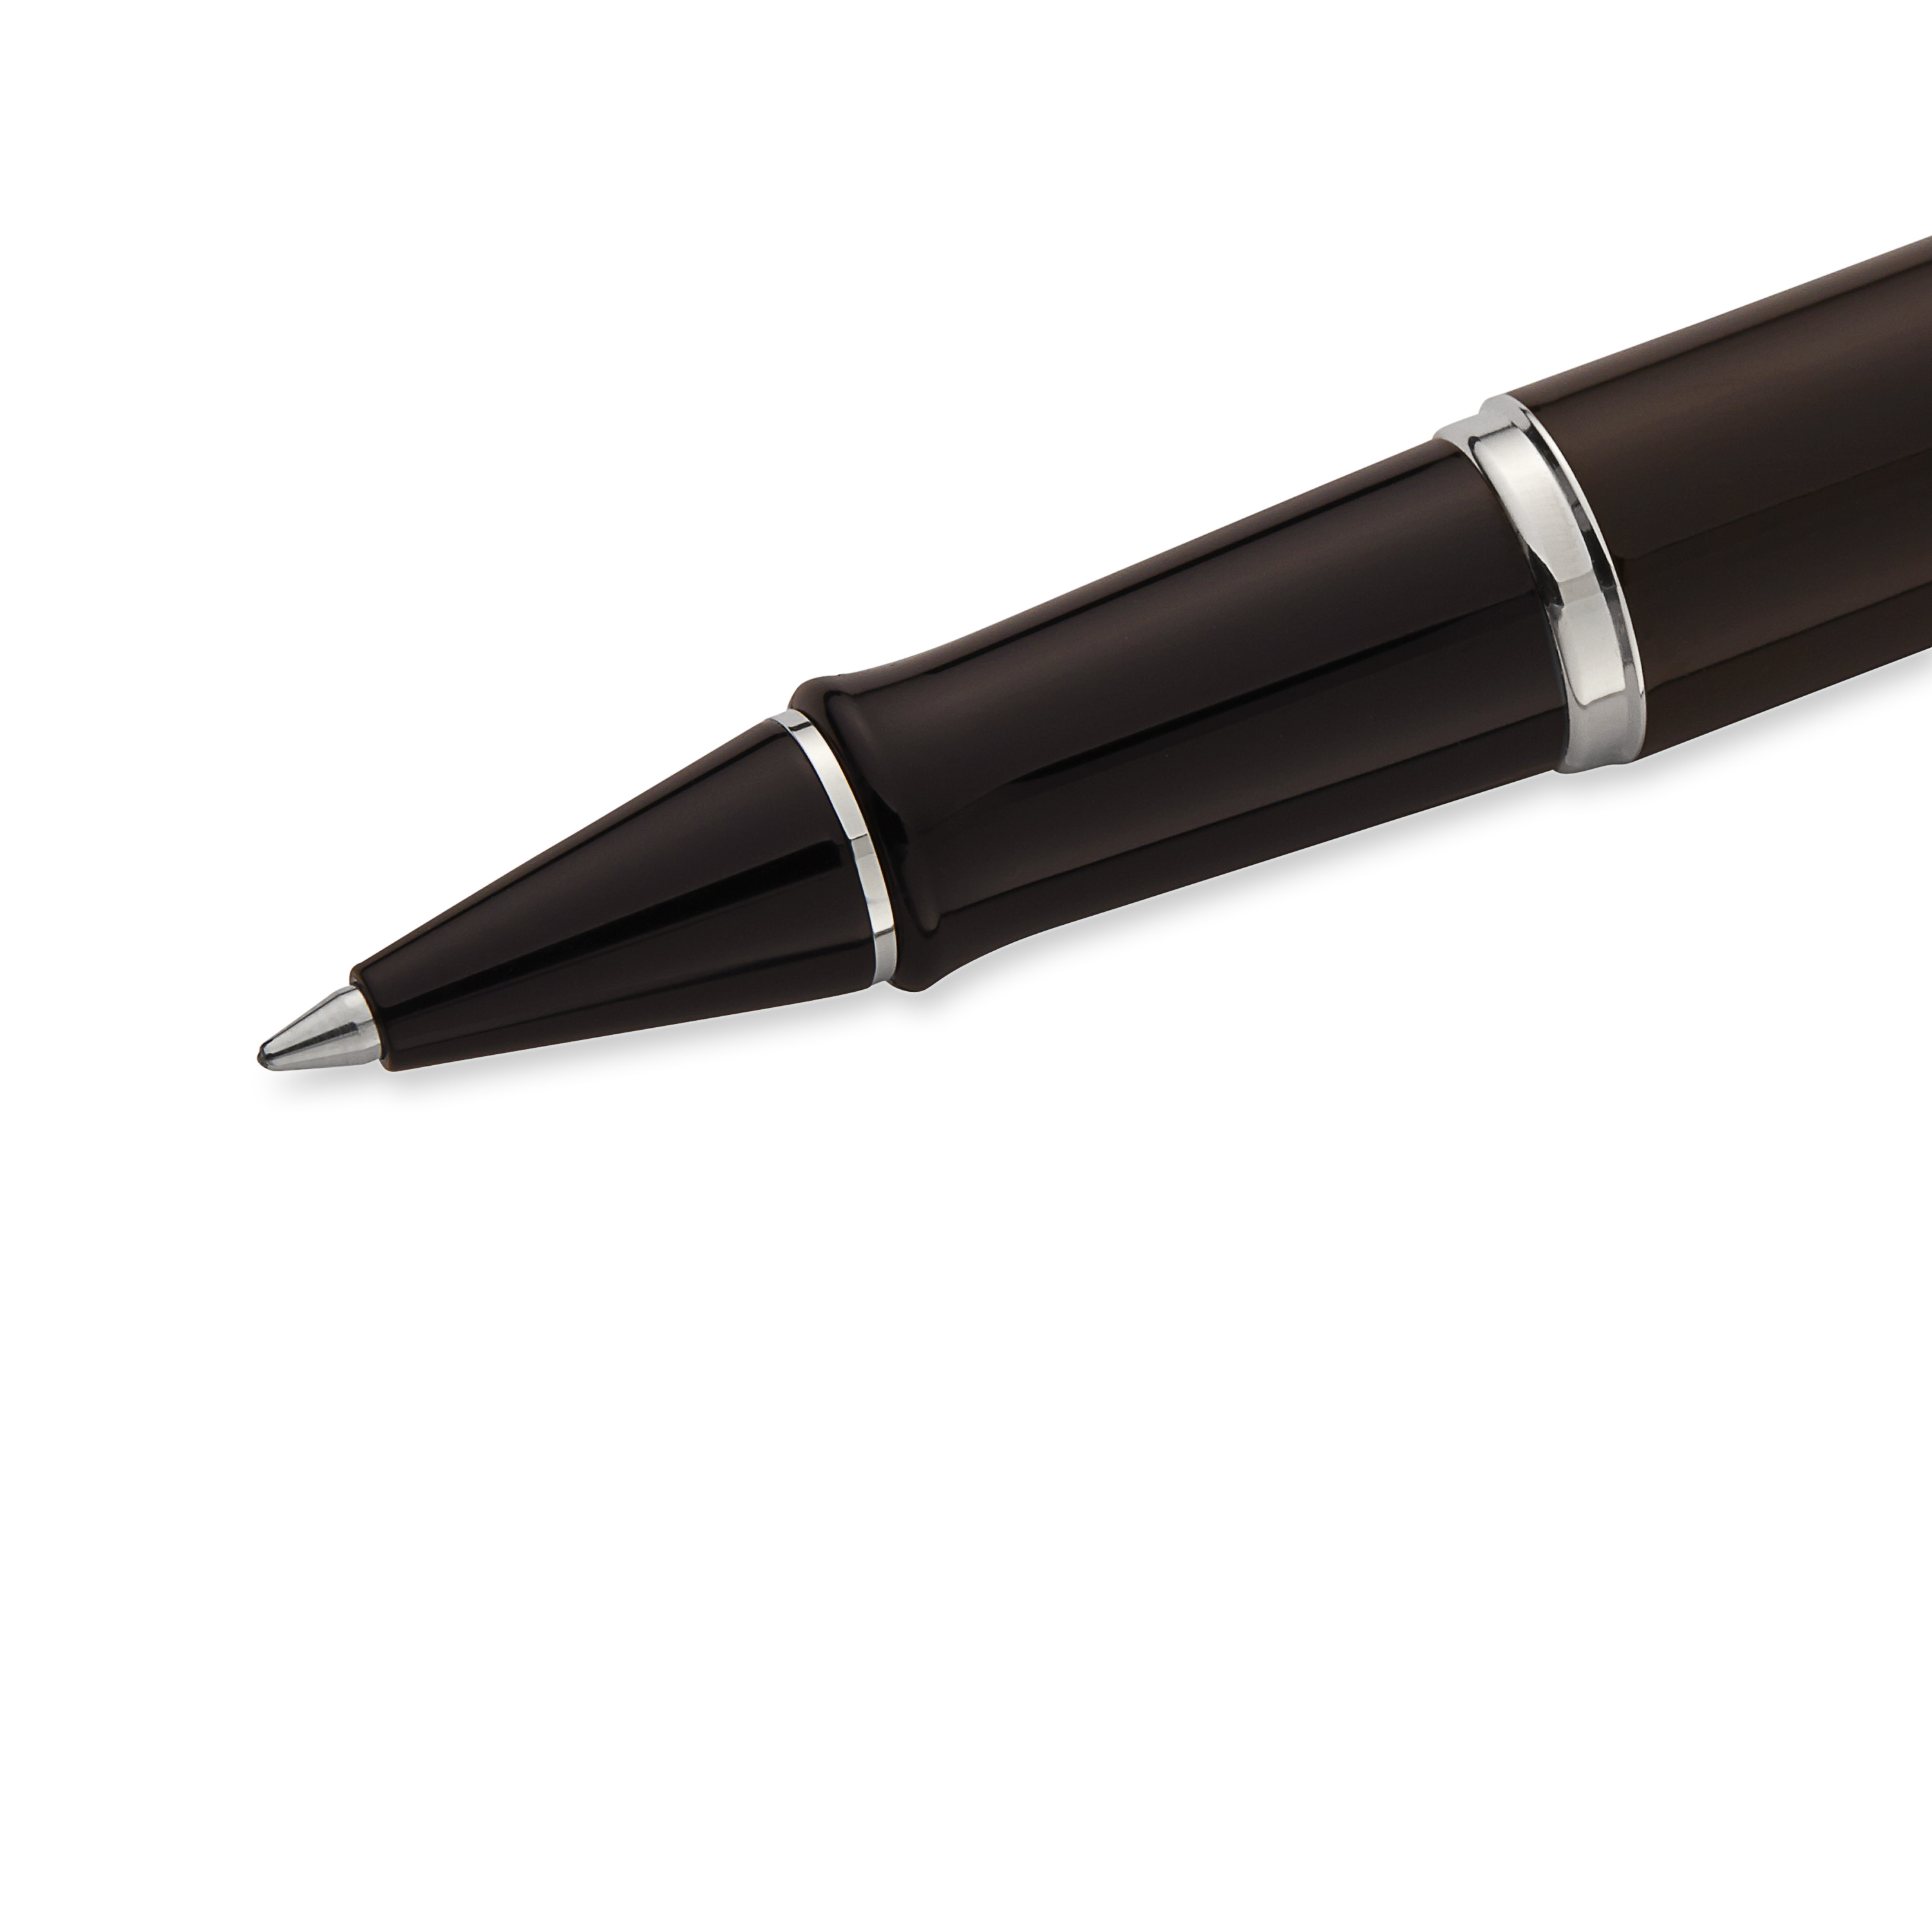 Waterman Expert Black Lacquer Chrome Trim Rollerball - Pencraft the boutique